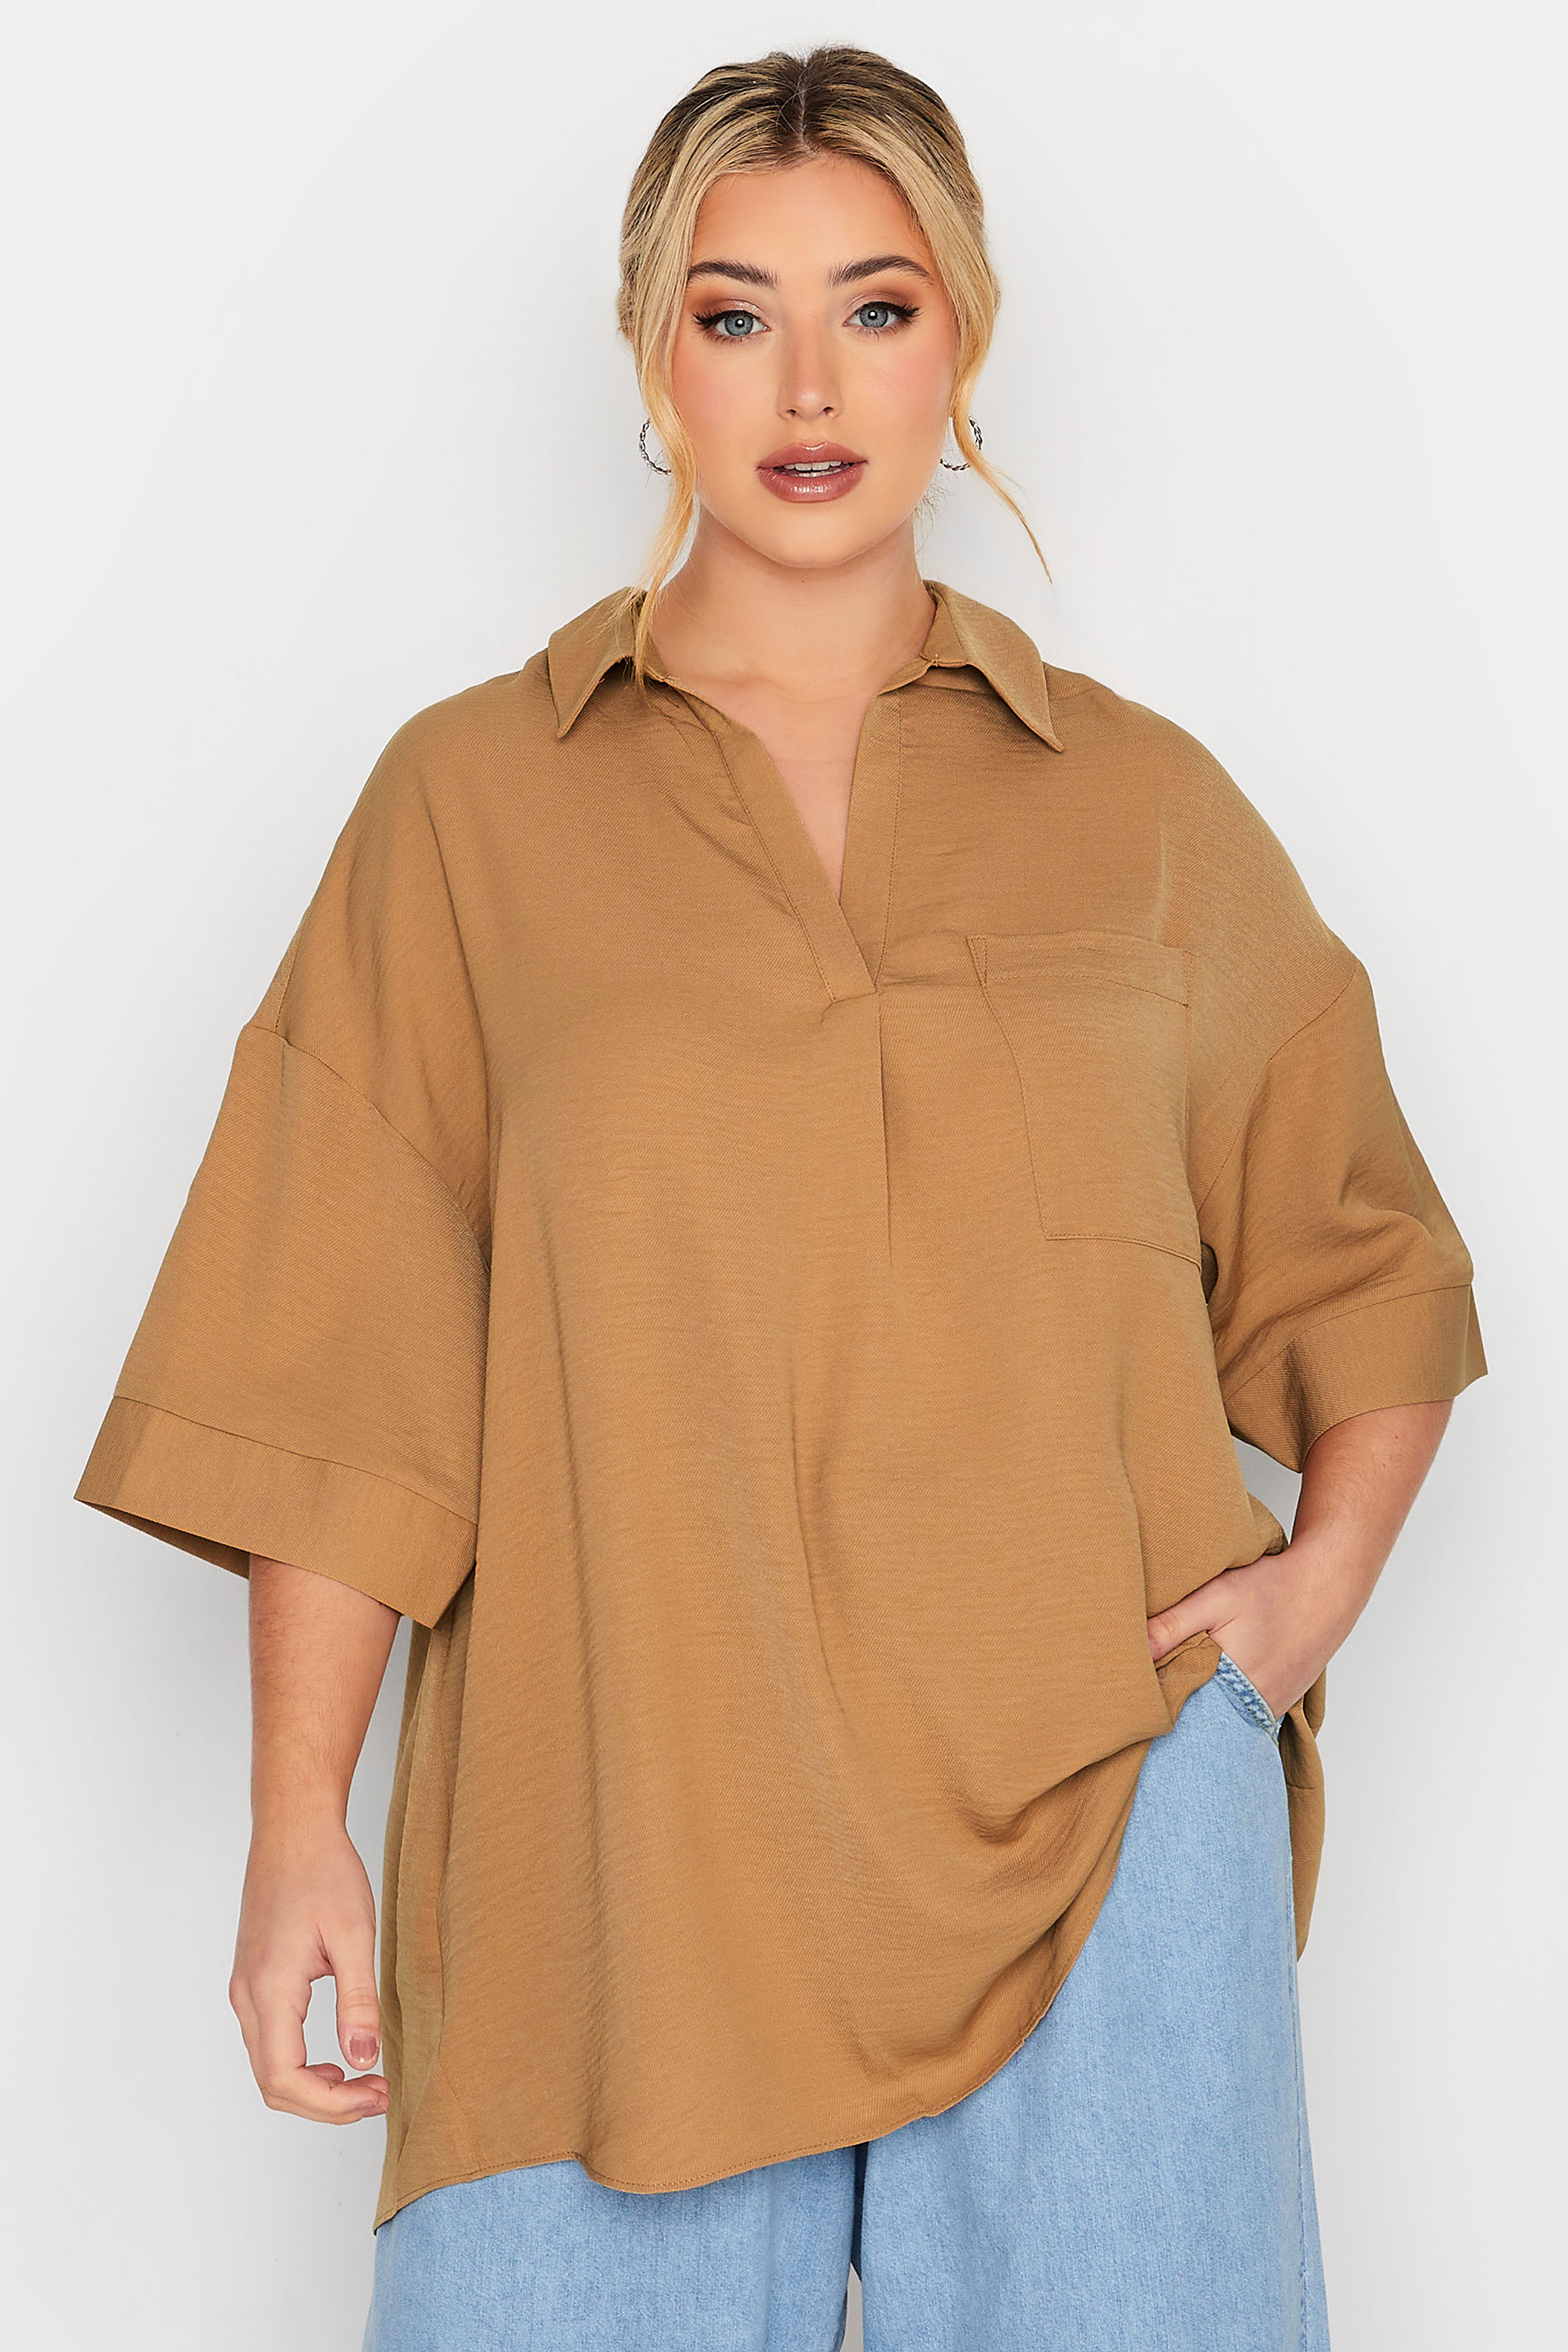 LIMITED COLLECTION Plus Size Beige Brown Shirt | Yours Clothing 1